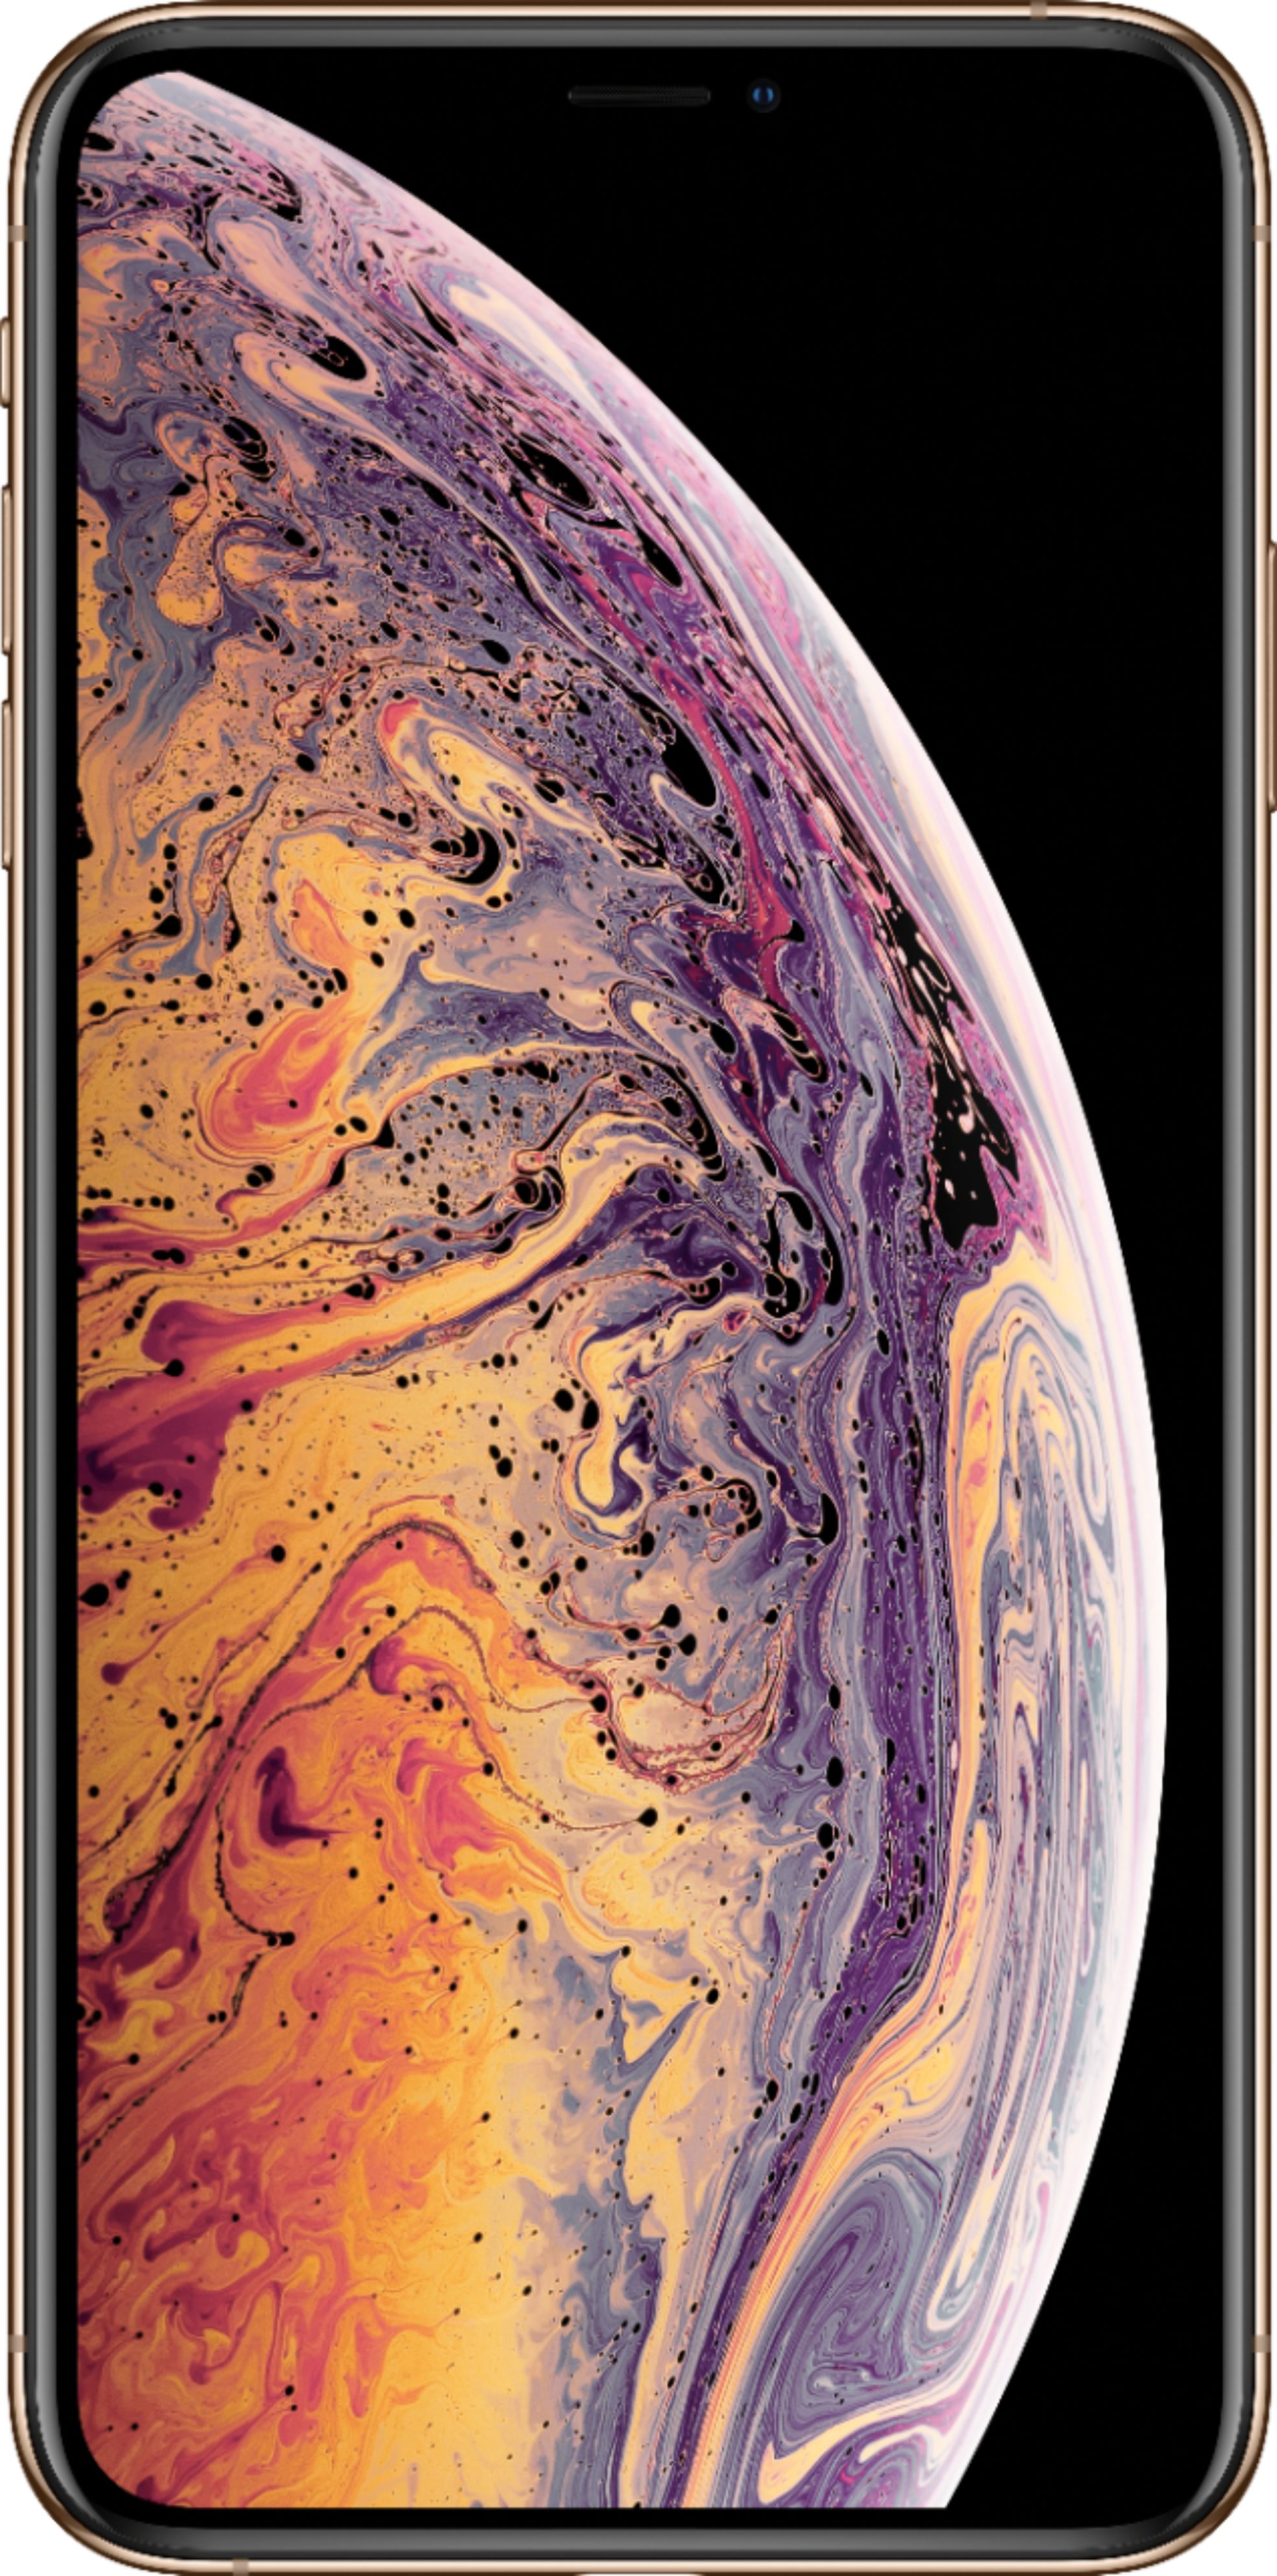 Restored Apple iPhone XS Max 512GB Factory GSM Unlocked T-Mobile AT&T 4G LTE - Gold (Refurbished) - image 1 of 2